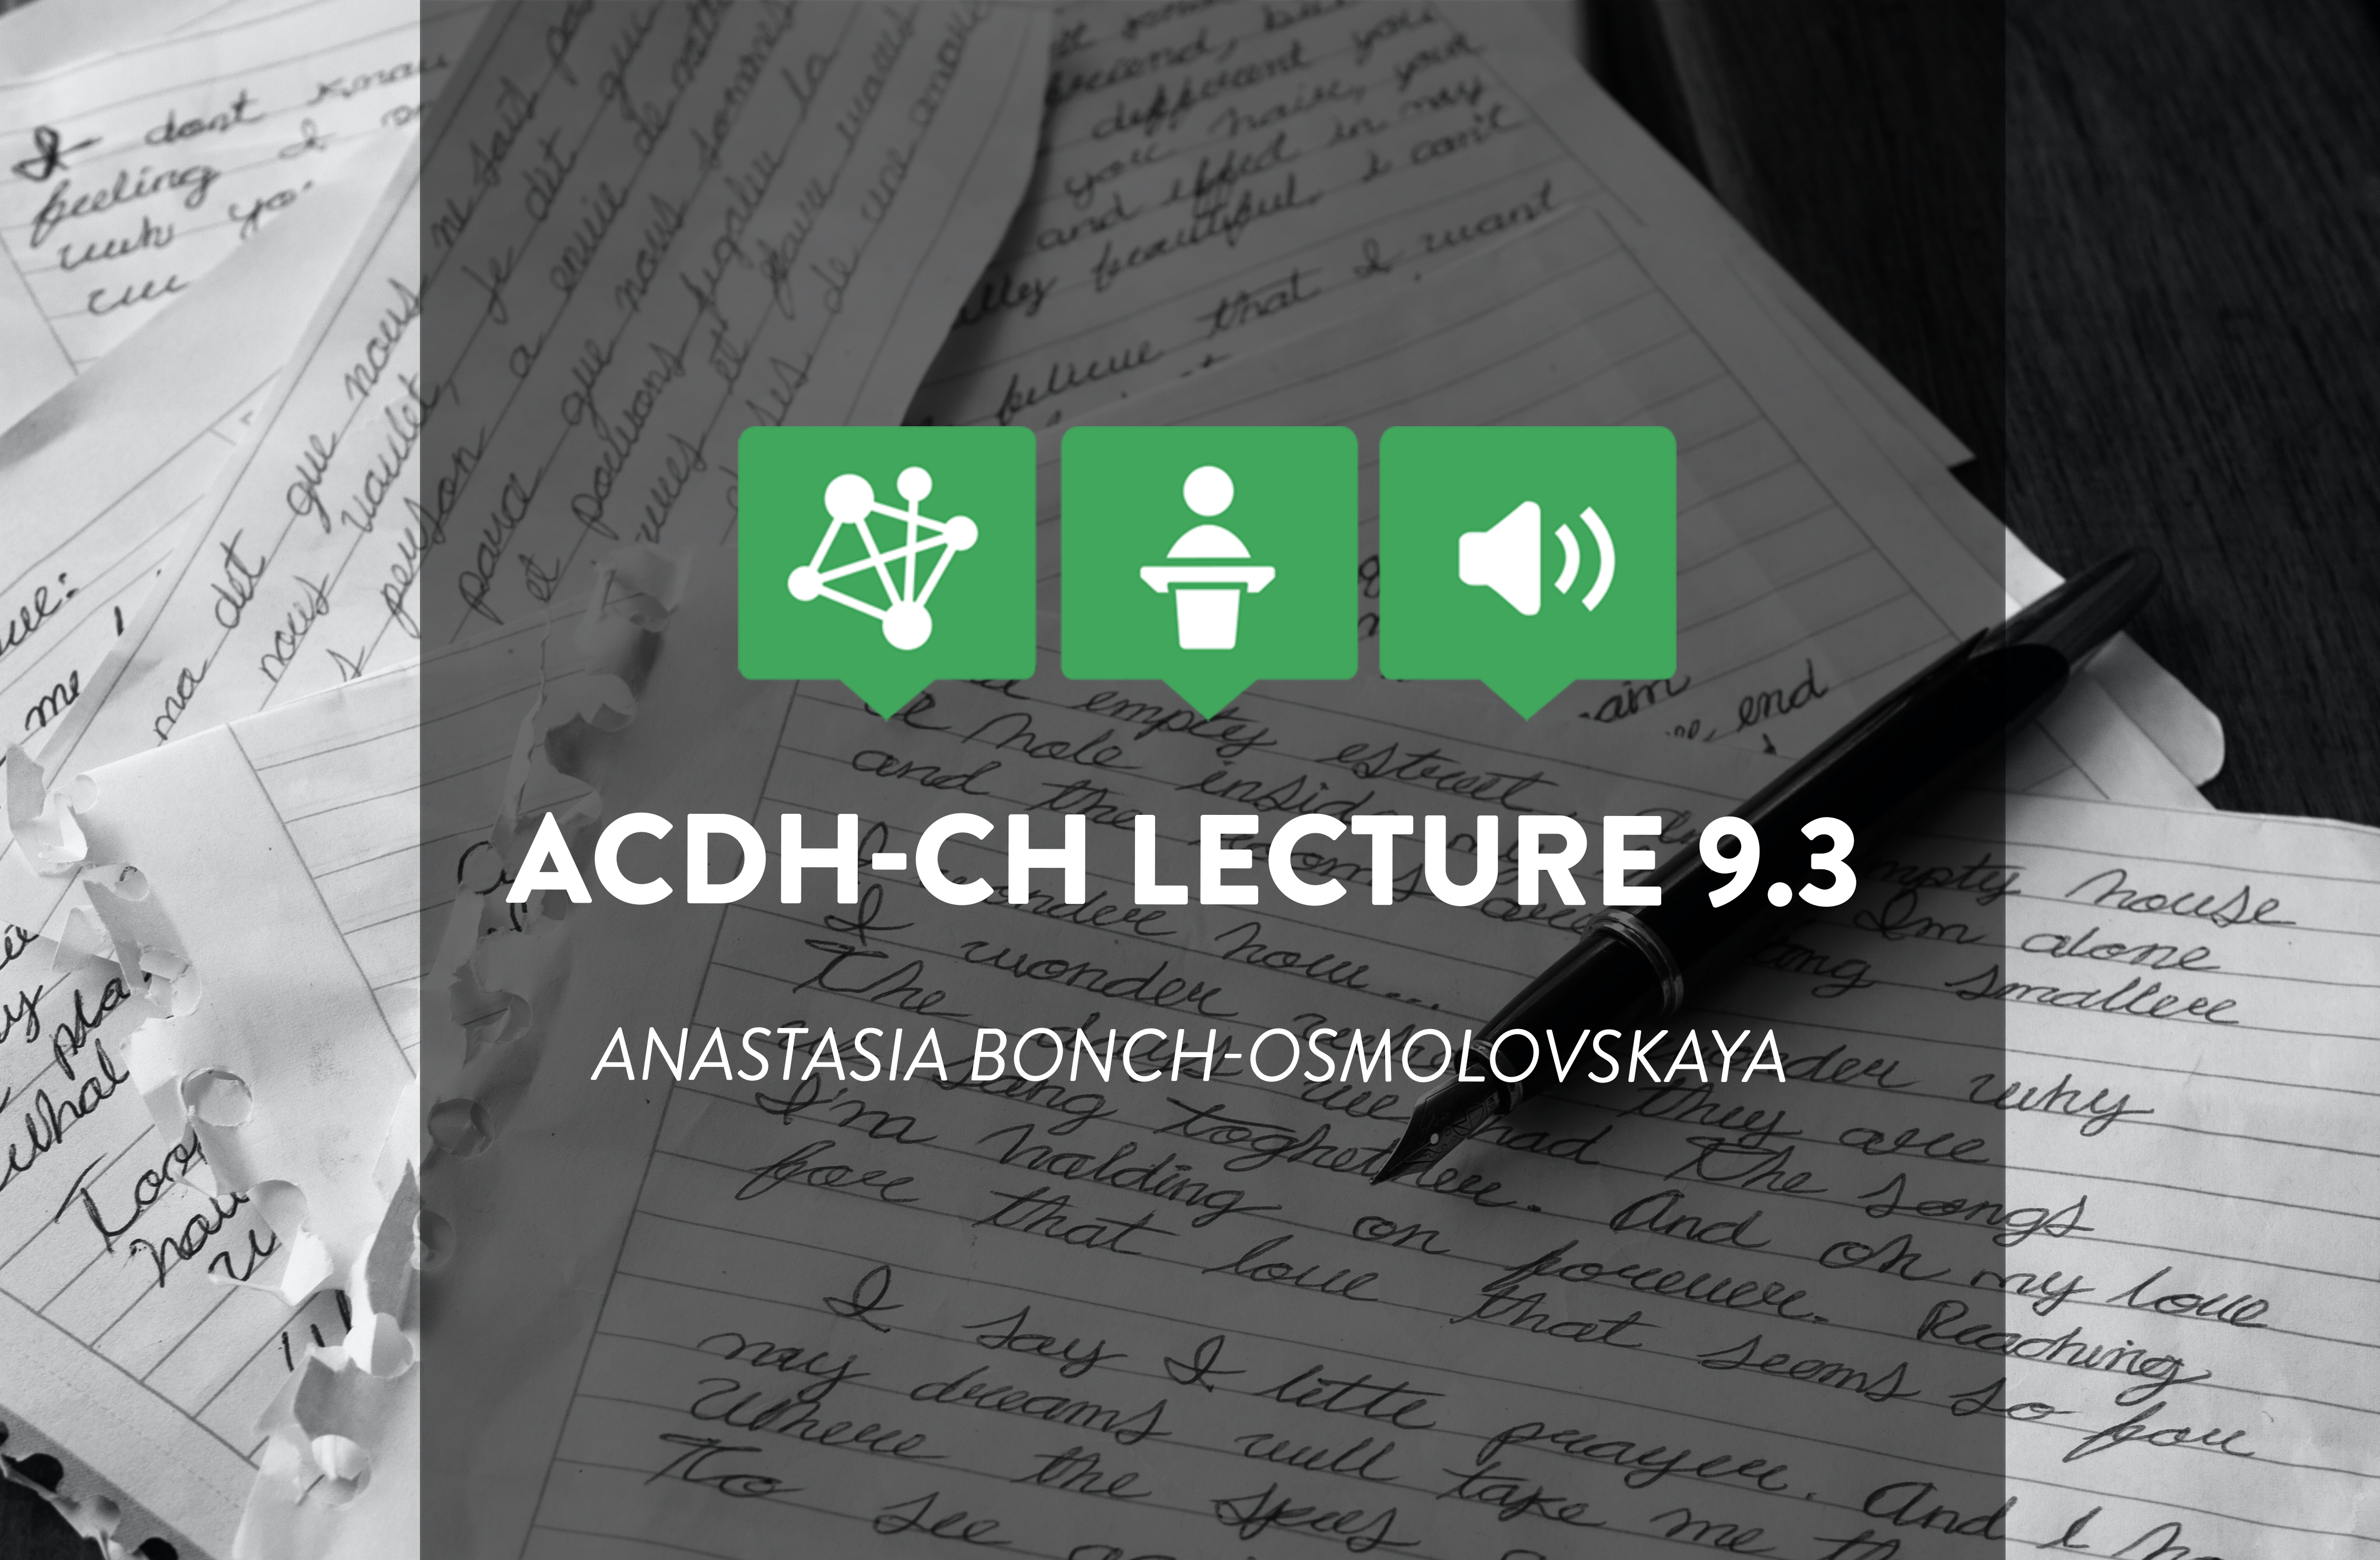 ACDH-CH Lecture 9.3